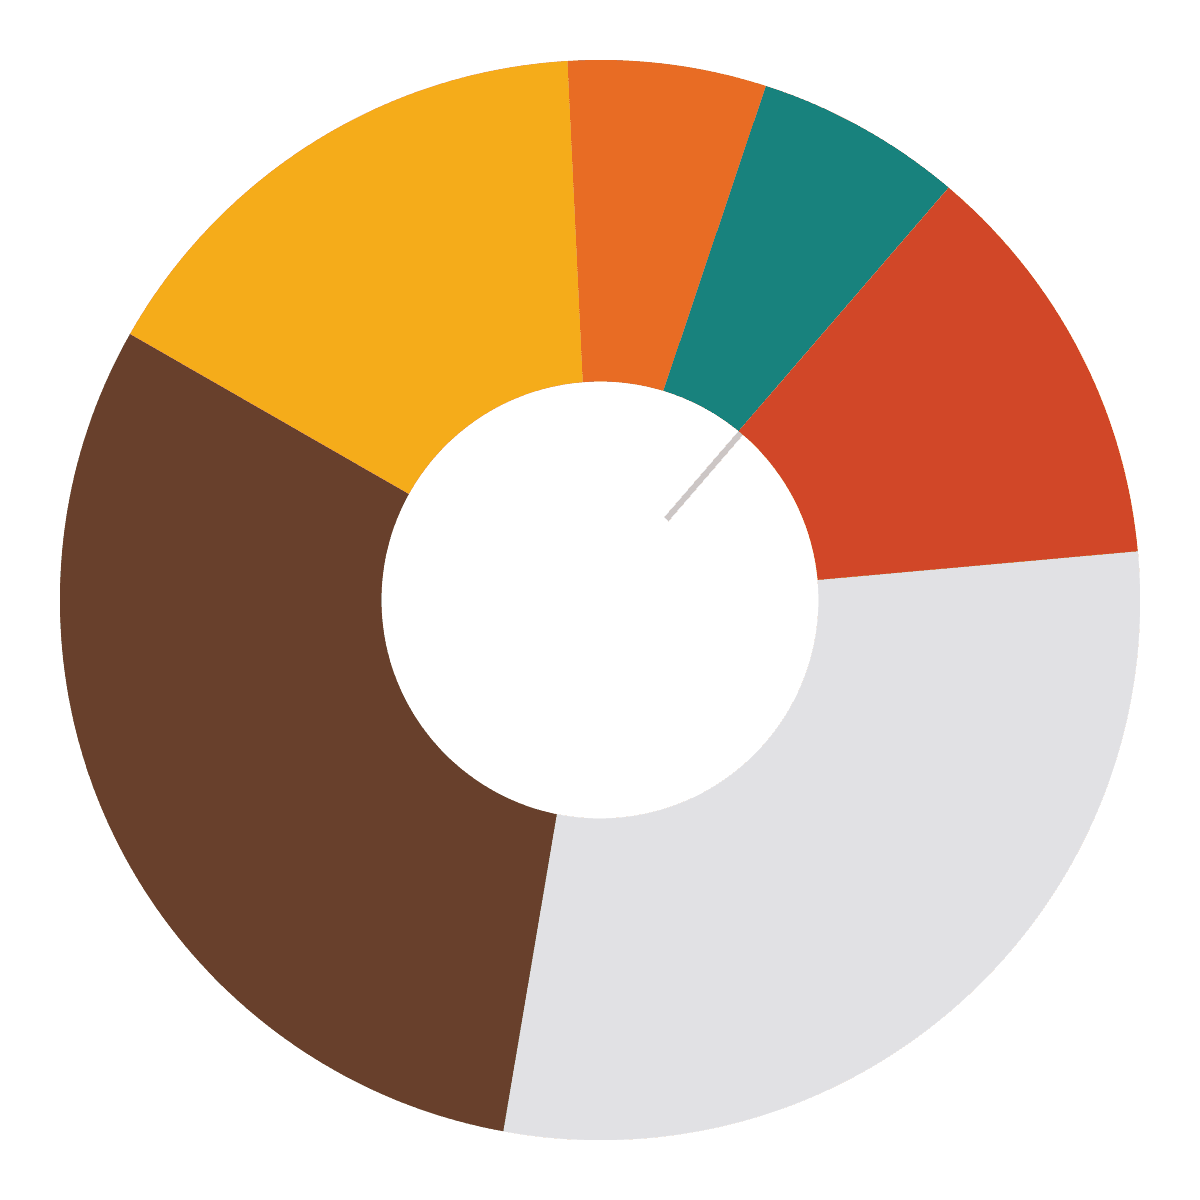 pie chart cycle diagram for process presentation infographic